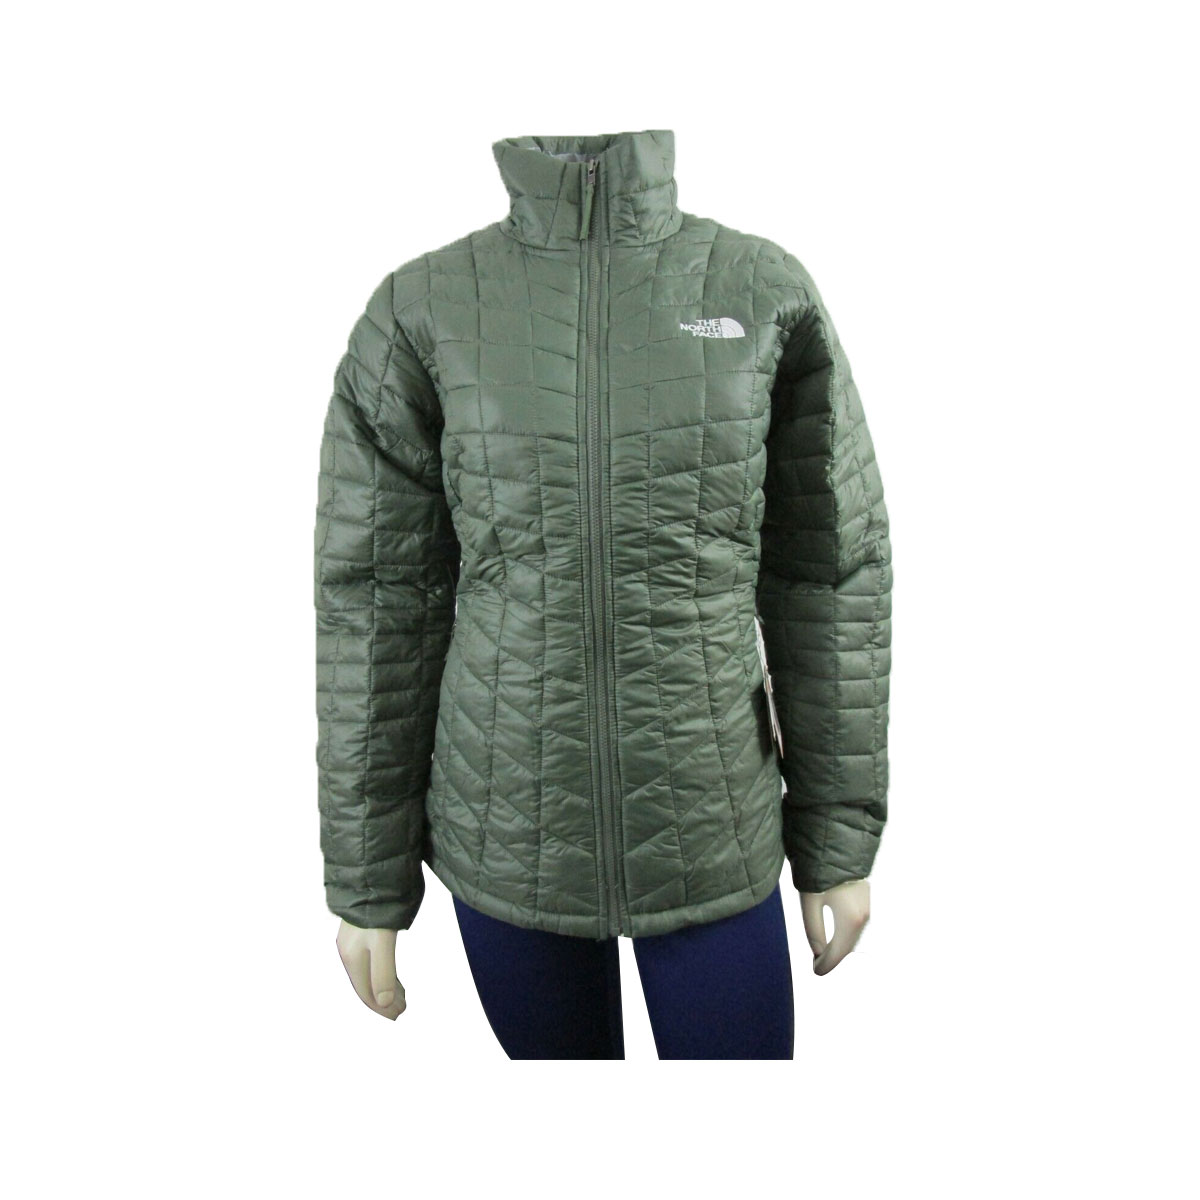 north face womens jacket olive green